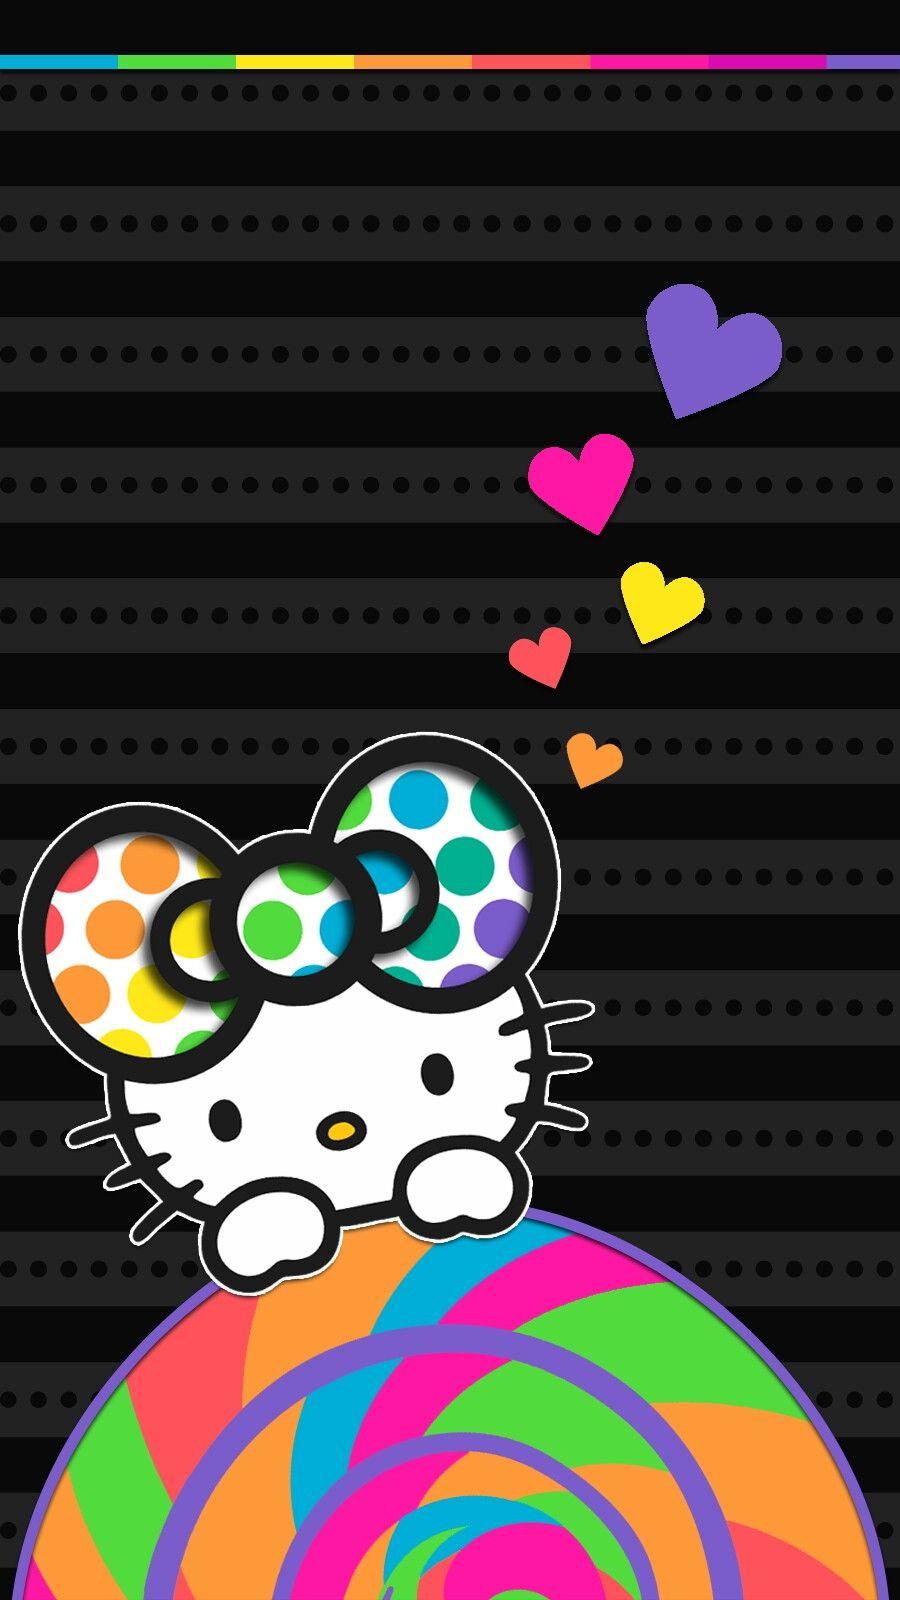 hello kitty #candy #wallpaper #iphone #android #theme #colorful. Hello kitty picture, Hello kitty wallpaper, Hello kitty background